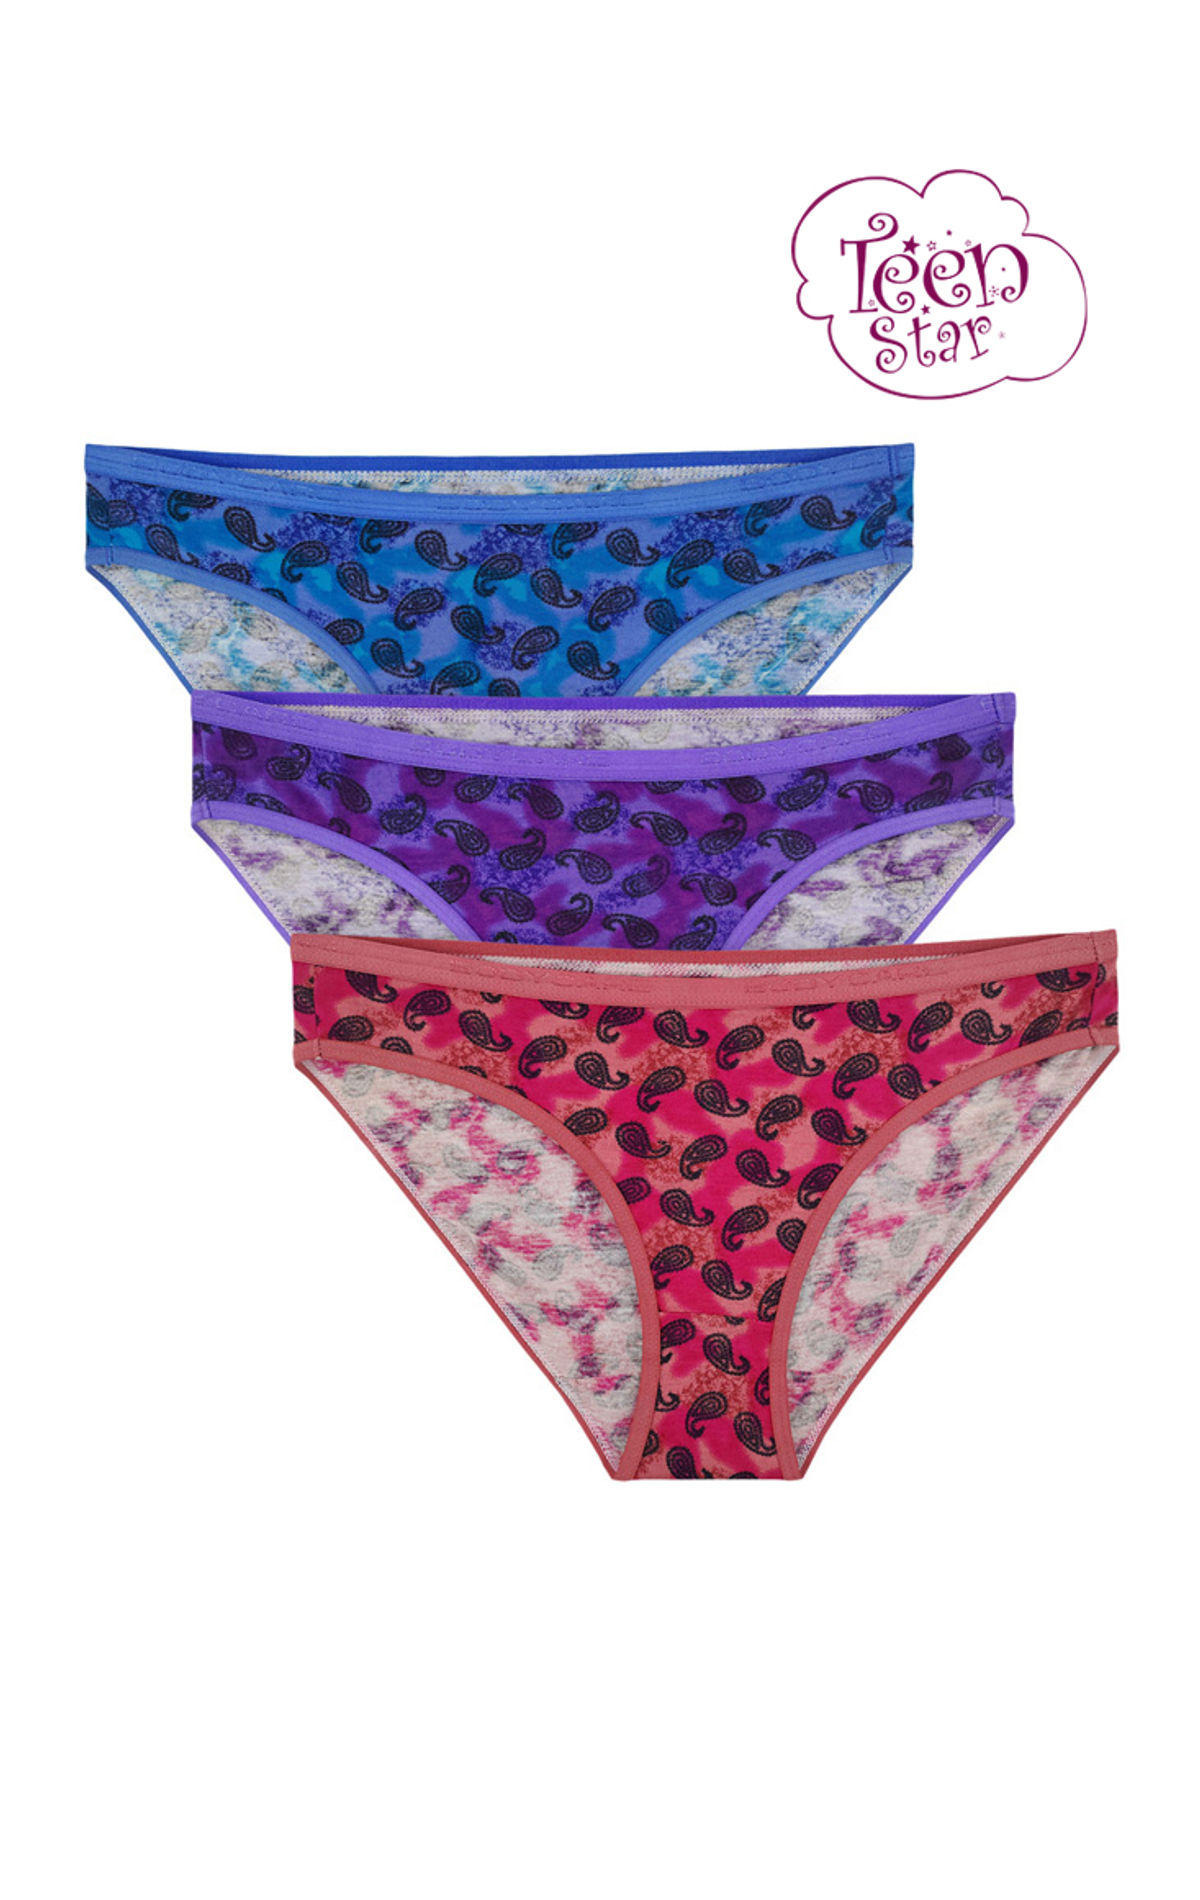 Bodycare 100 Cotton Teenager Panties In Pack Of 3-t-930-assorted, T-930-3pcs